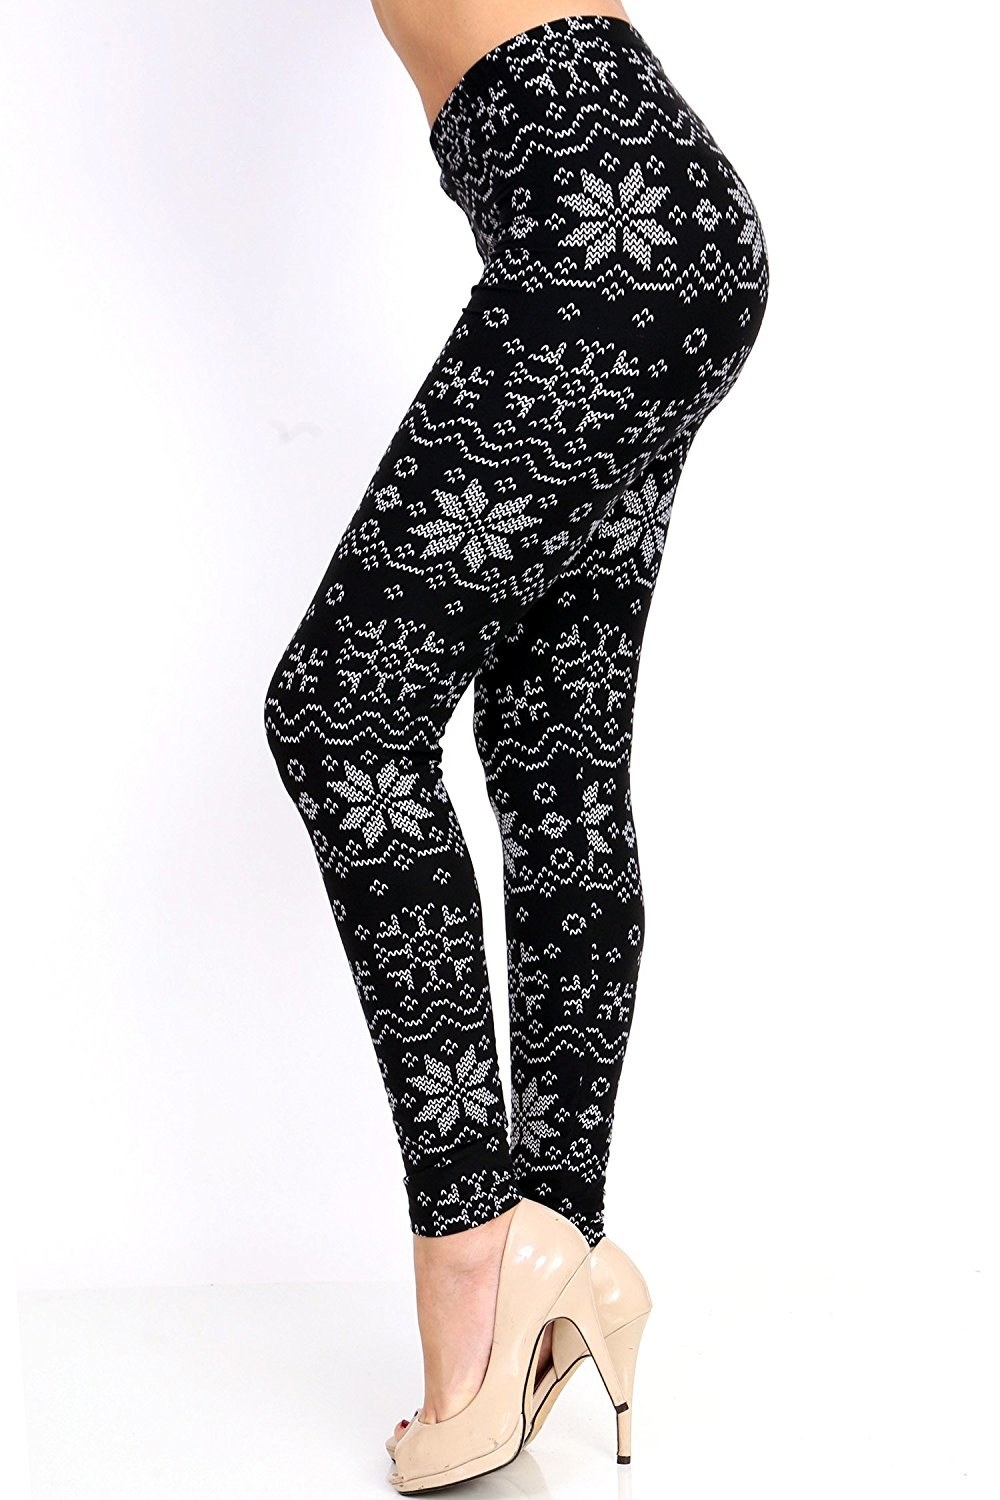 25 Amazing Pairs Of Leggings People Actually Swear By